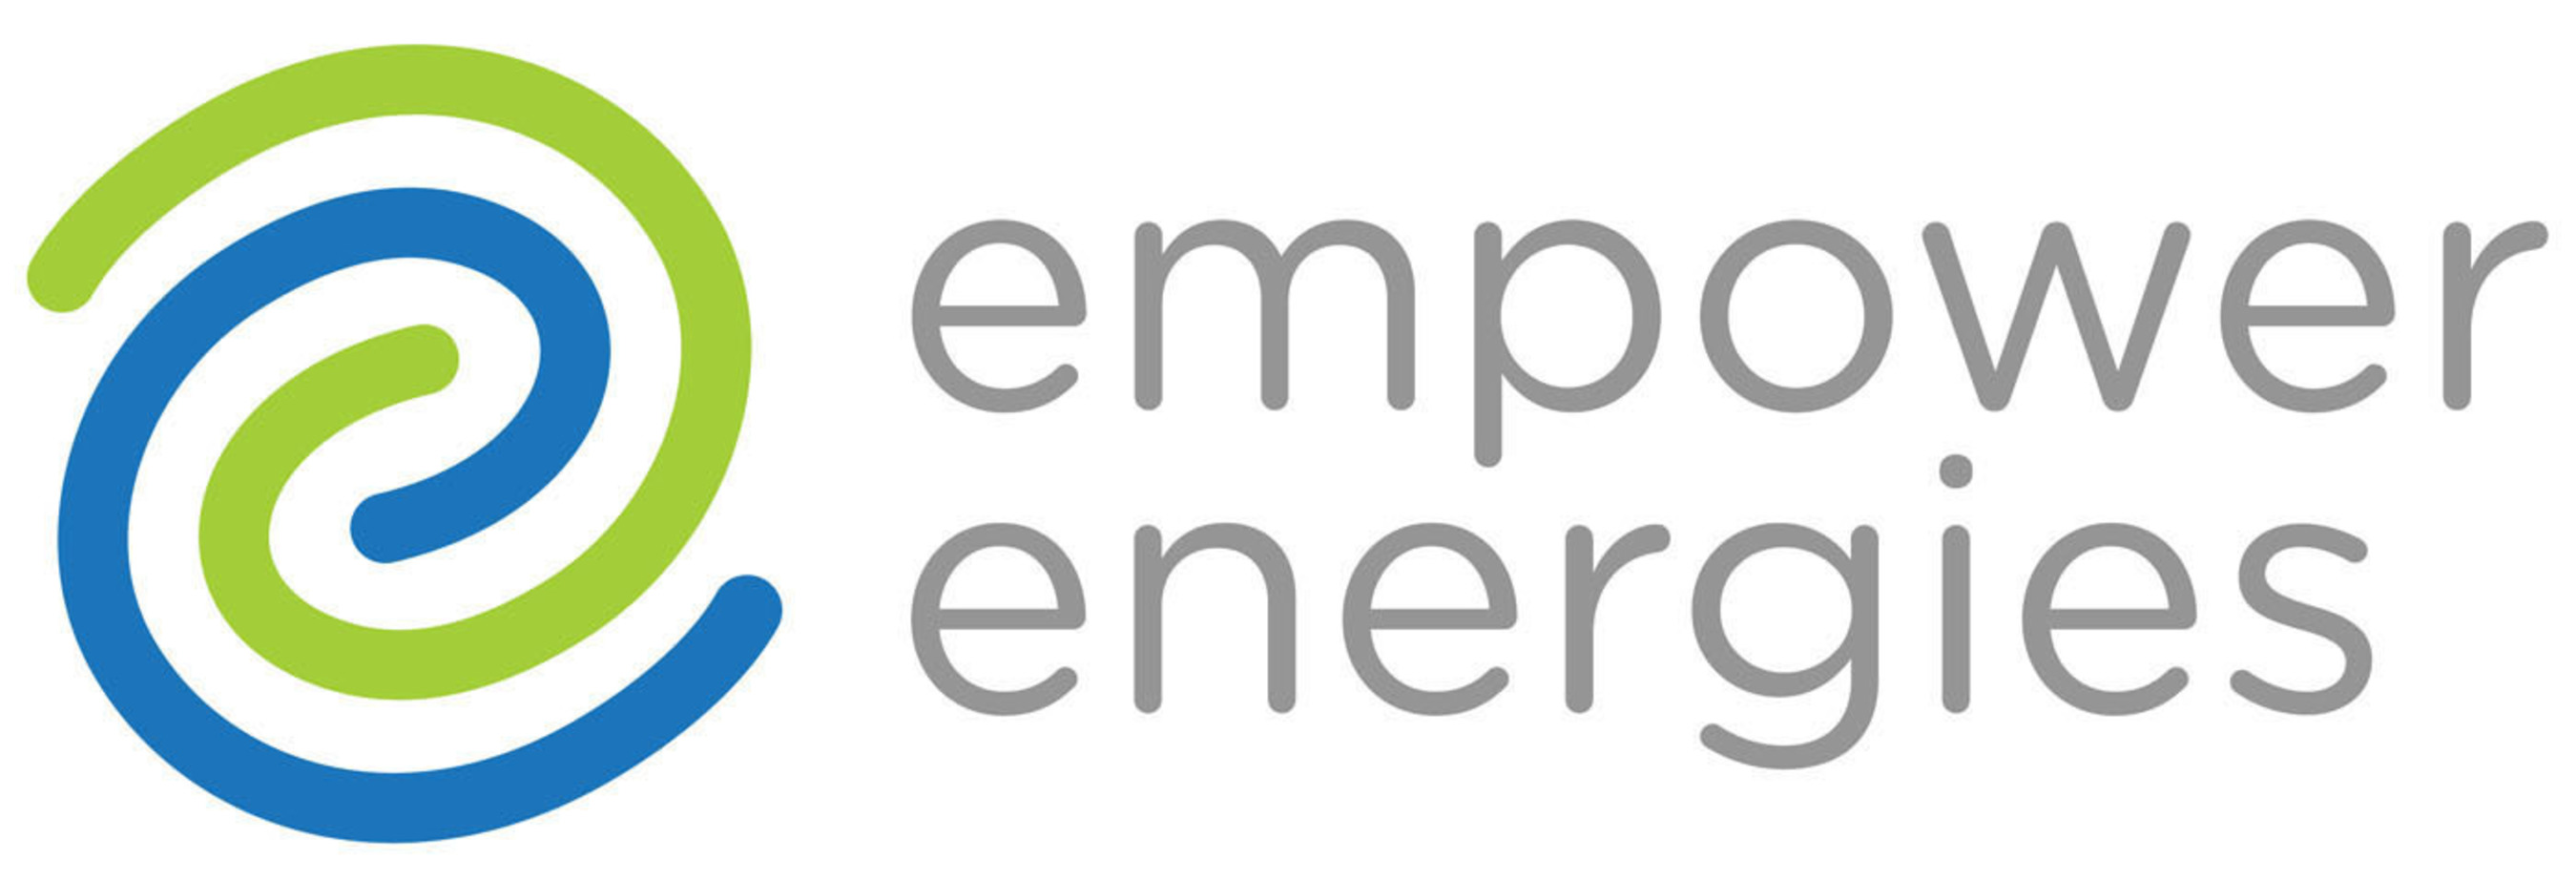 Empower Energies, Inc., headquartered in Frederick, Maryland, is a clean energy project solutions provider focused on applying the right mixTM of photovoltaic (PV) solar, combined heat and power (CHP), and energy optimization solutions - with financing - to meet the profitability, resiliency and sustainability objectives of hospitals, universities, municipalities, and schools, as well as multi-facility commercial and industrial organizations. For more information visit  www.EmpowerEnergies.com (PRNewsFoto/)